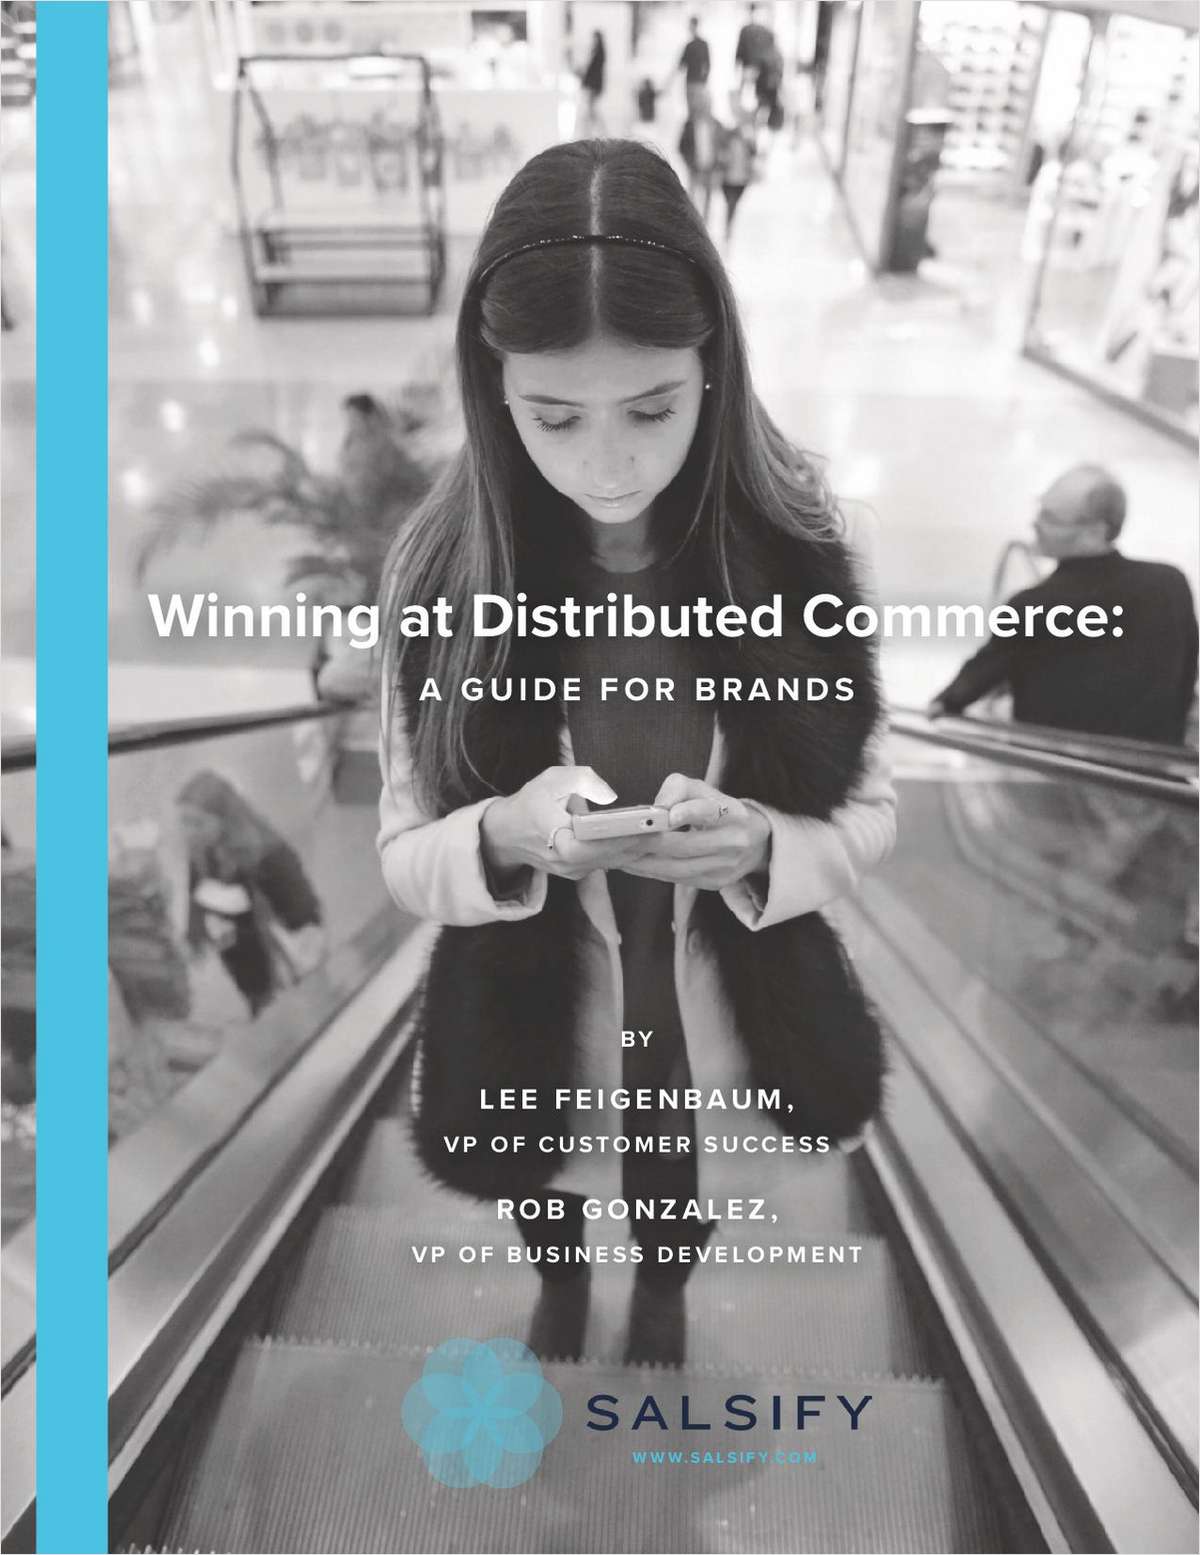 Winning at Distributed Commerce: A Guide for Brands